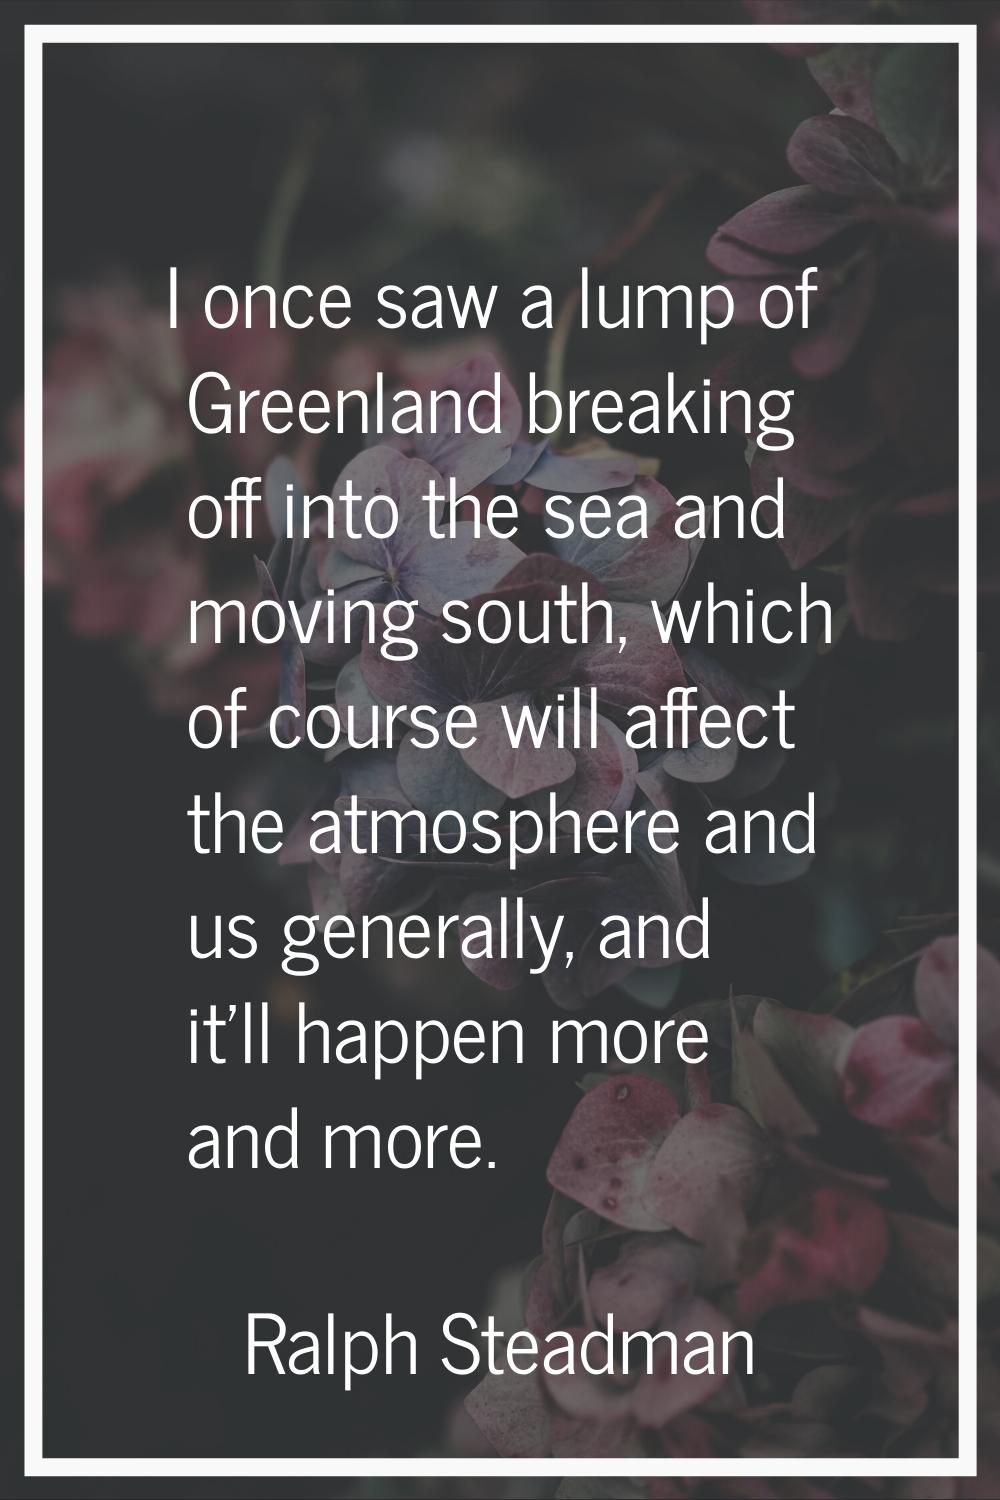 I once saw a lump of Greenland breaking off into the sea and moving south, which of course will aff